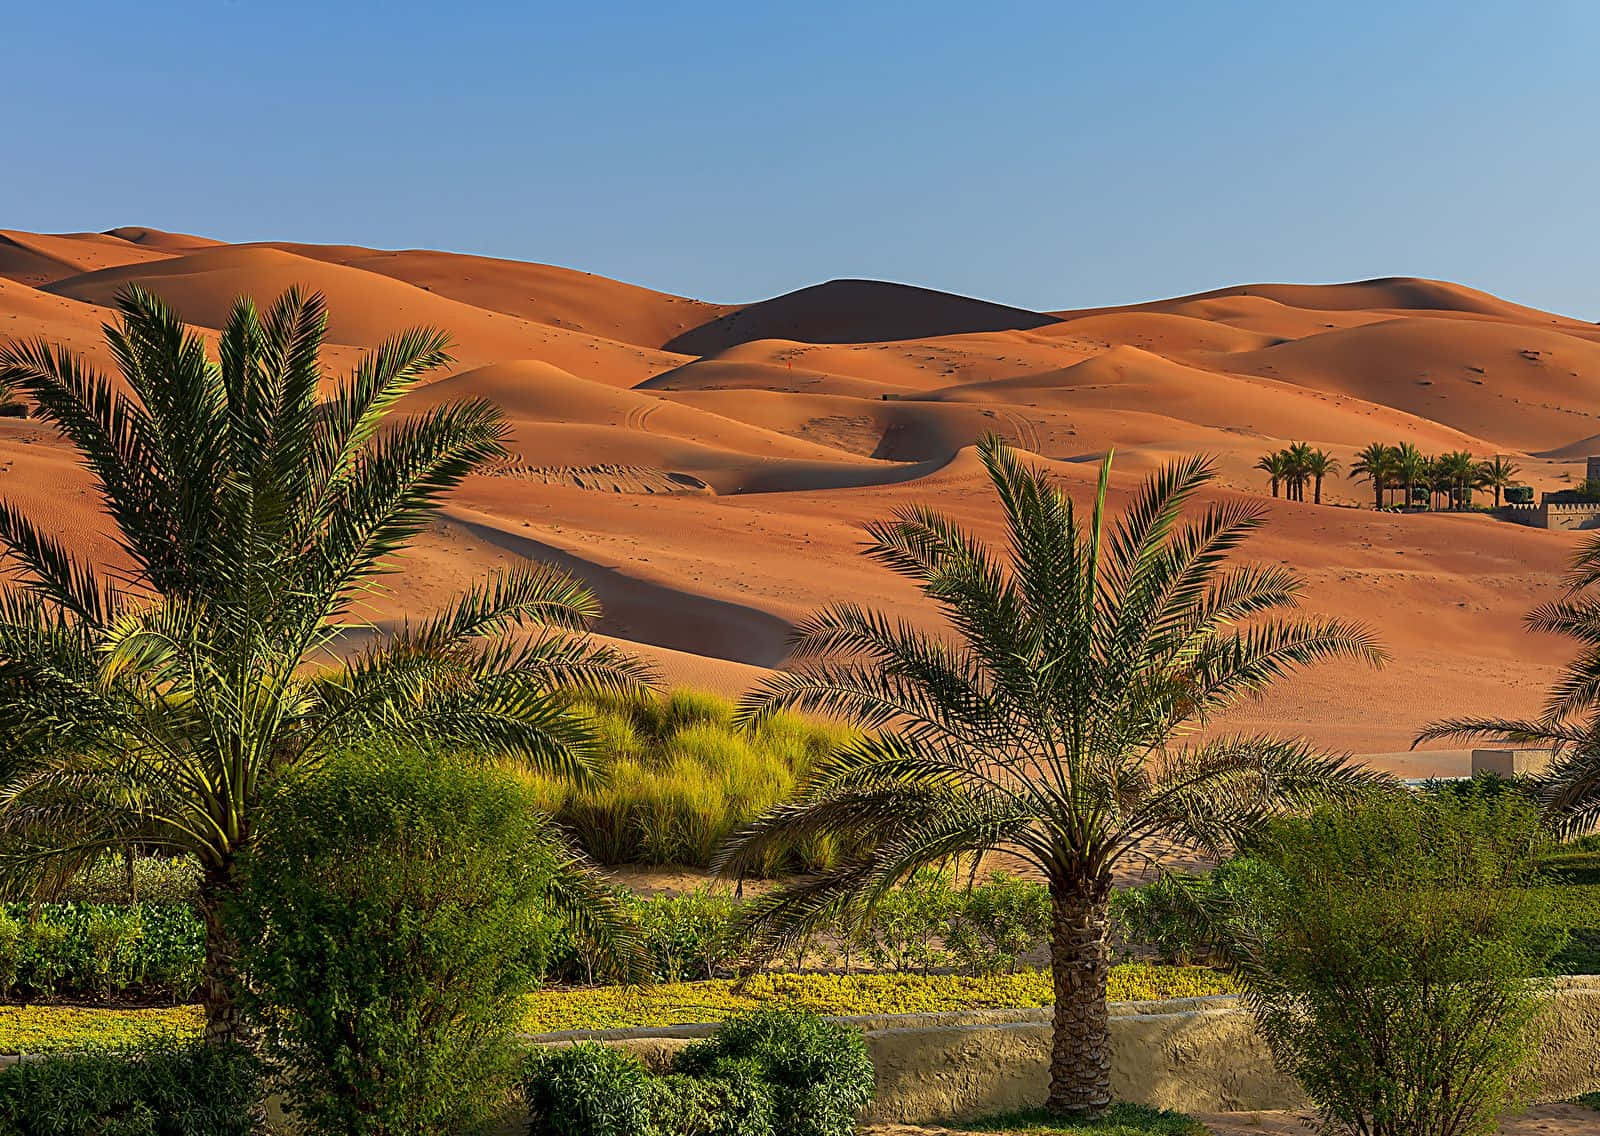 Take in the breathtaking views of the UAE